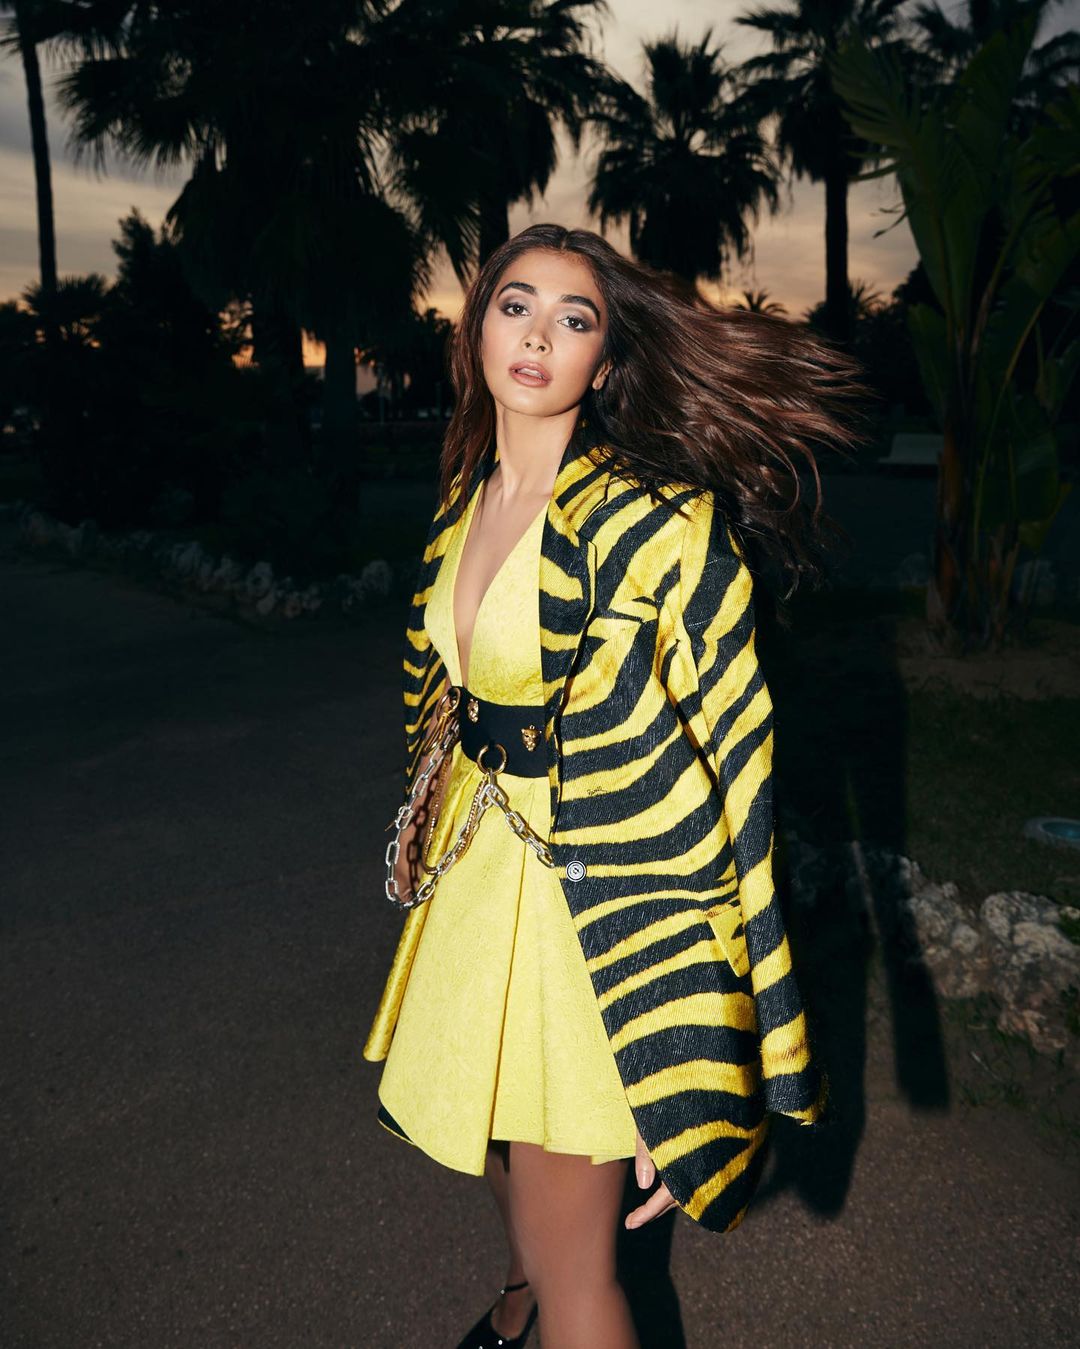 Pooja Hegde looks gorgeous in the yellow dress with the tiger-striped blazer